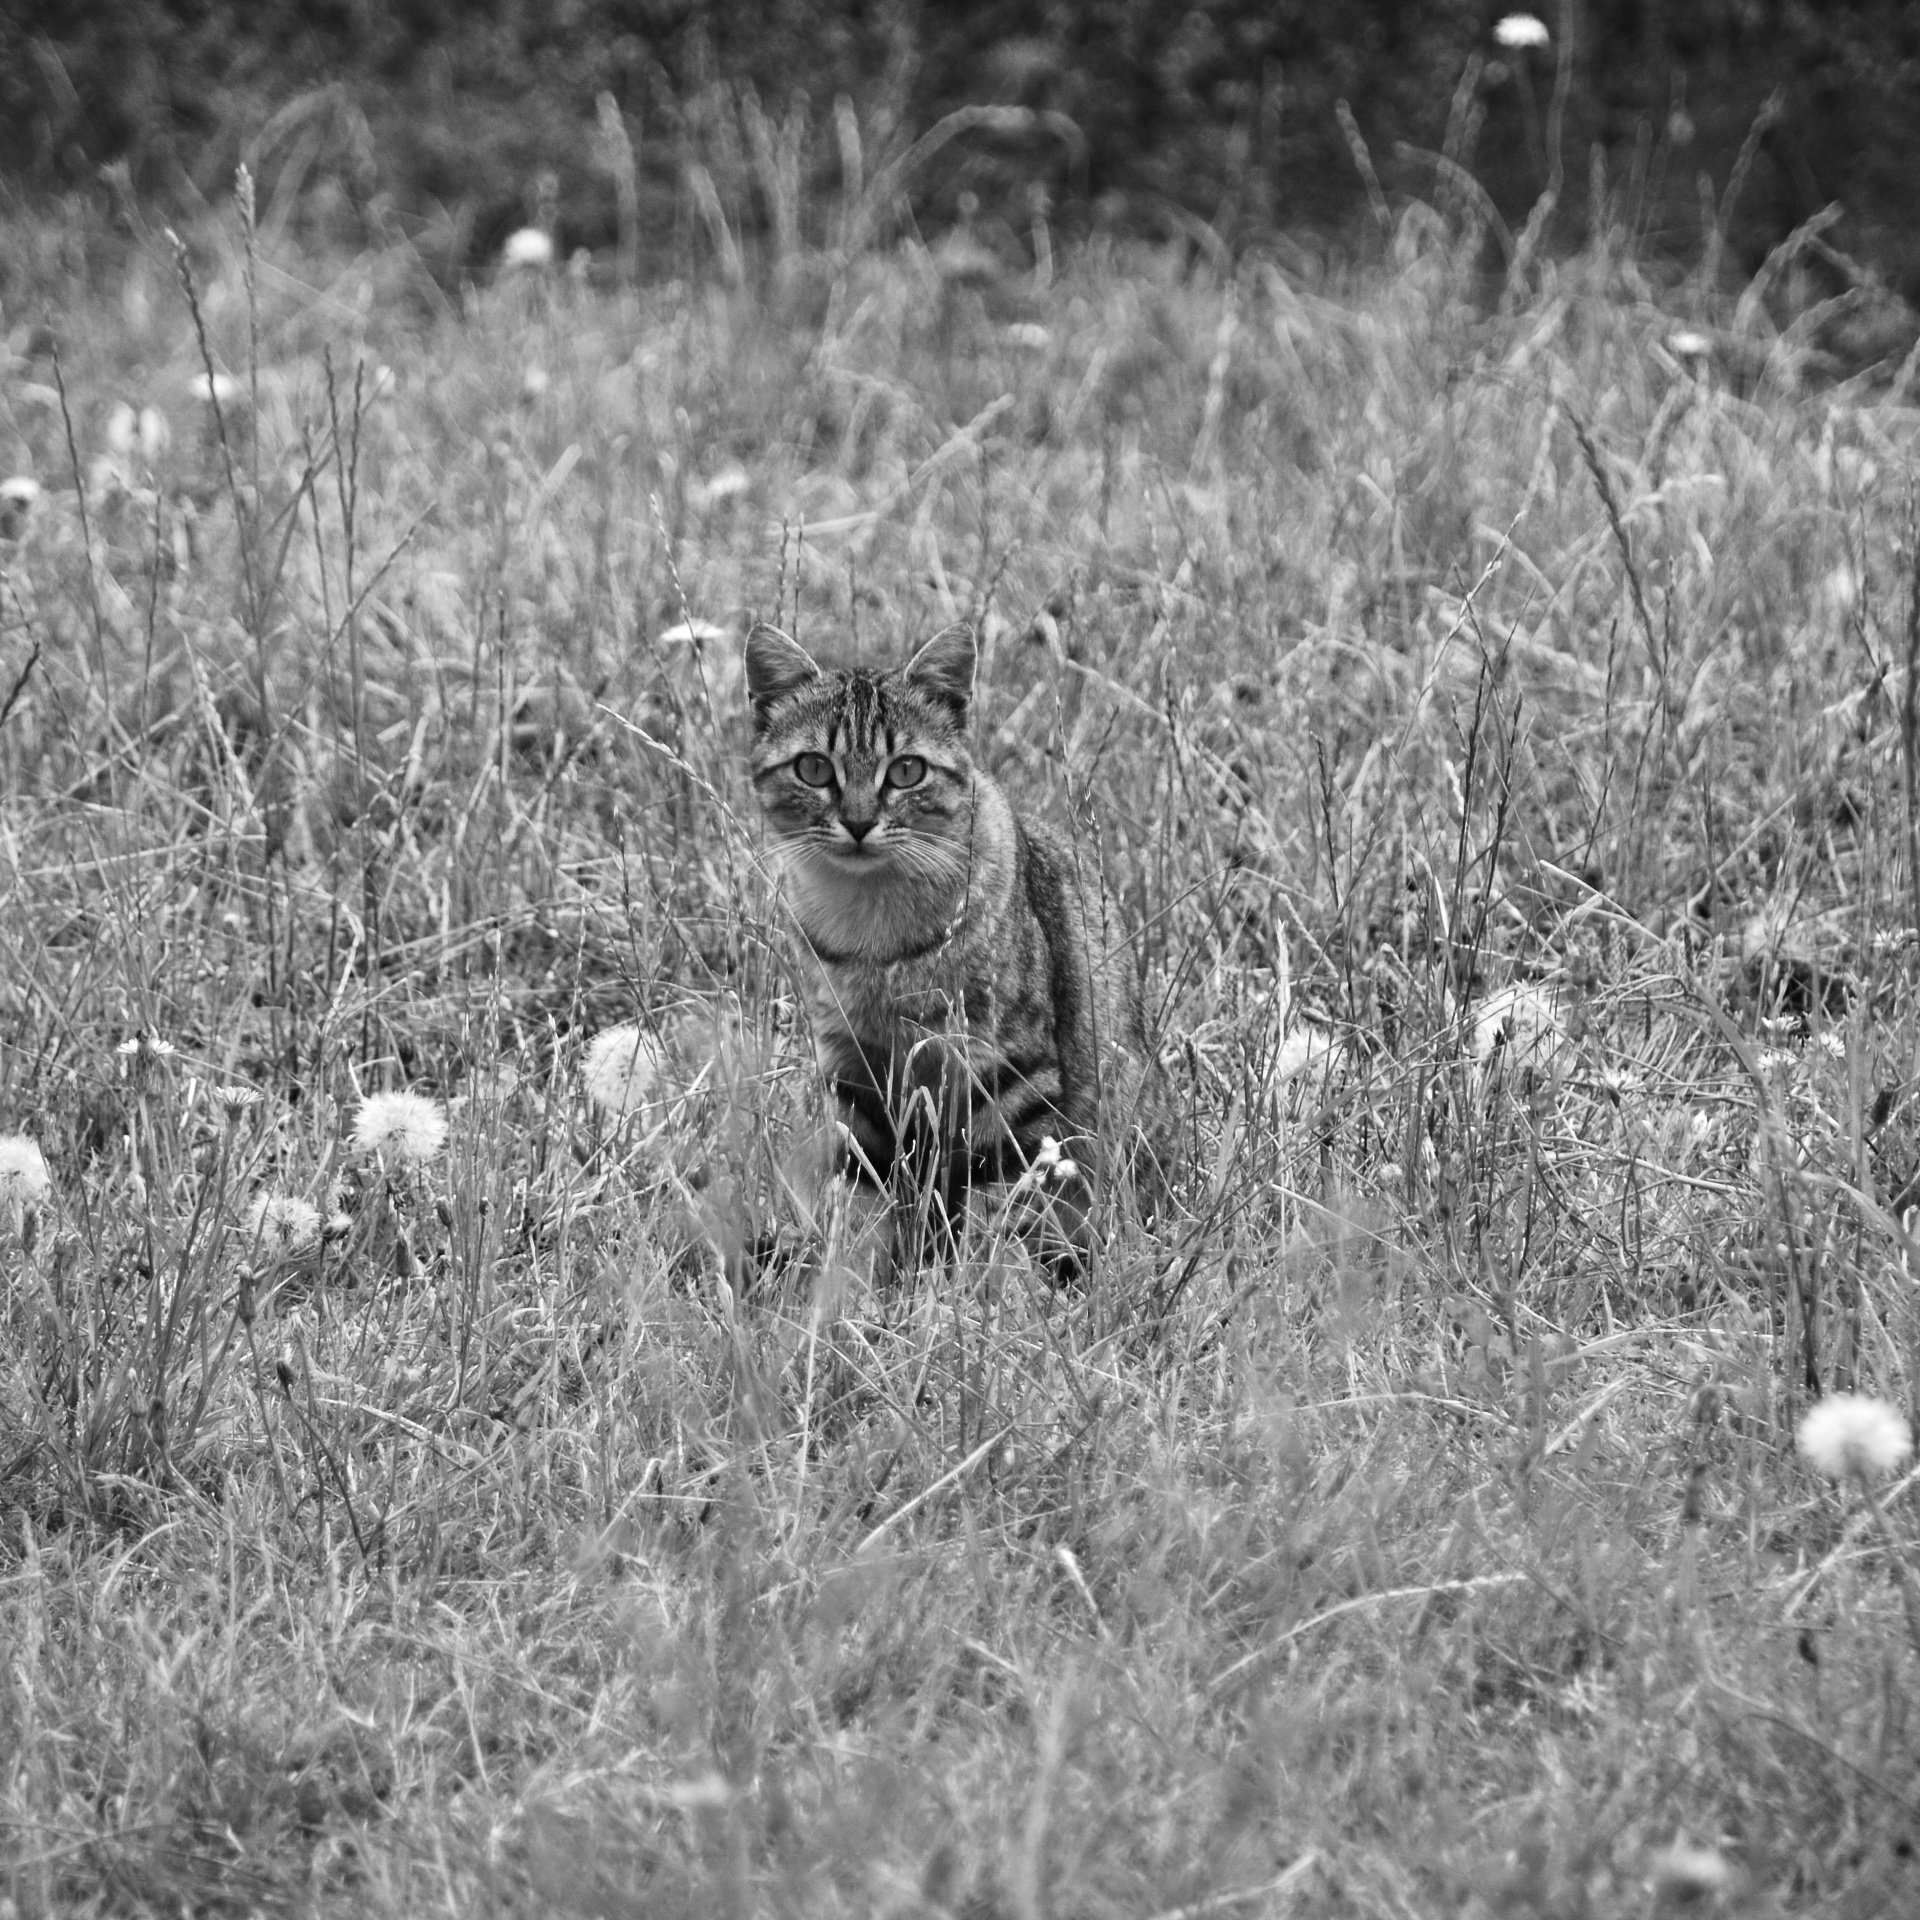 cat,feline,animal,wildlife,nature,grass,black white,tabby cat,view of the cat,free pictures, free photos, free images, royalty free, free illustrations, public domain